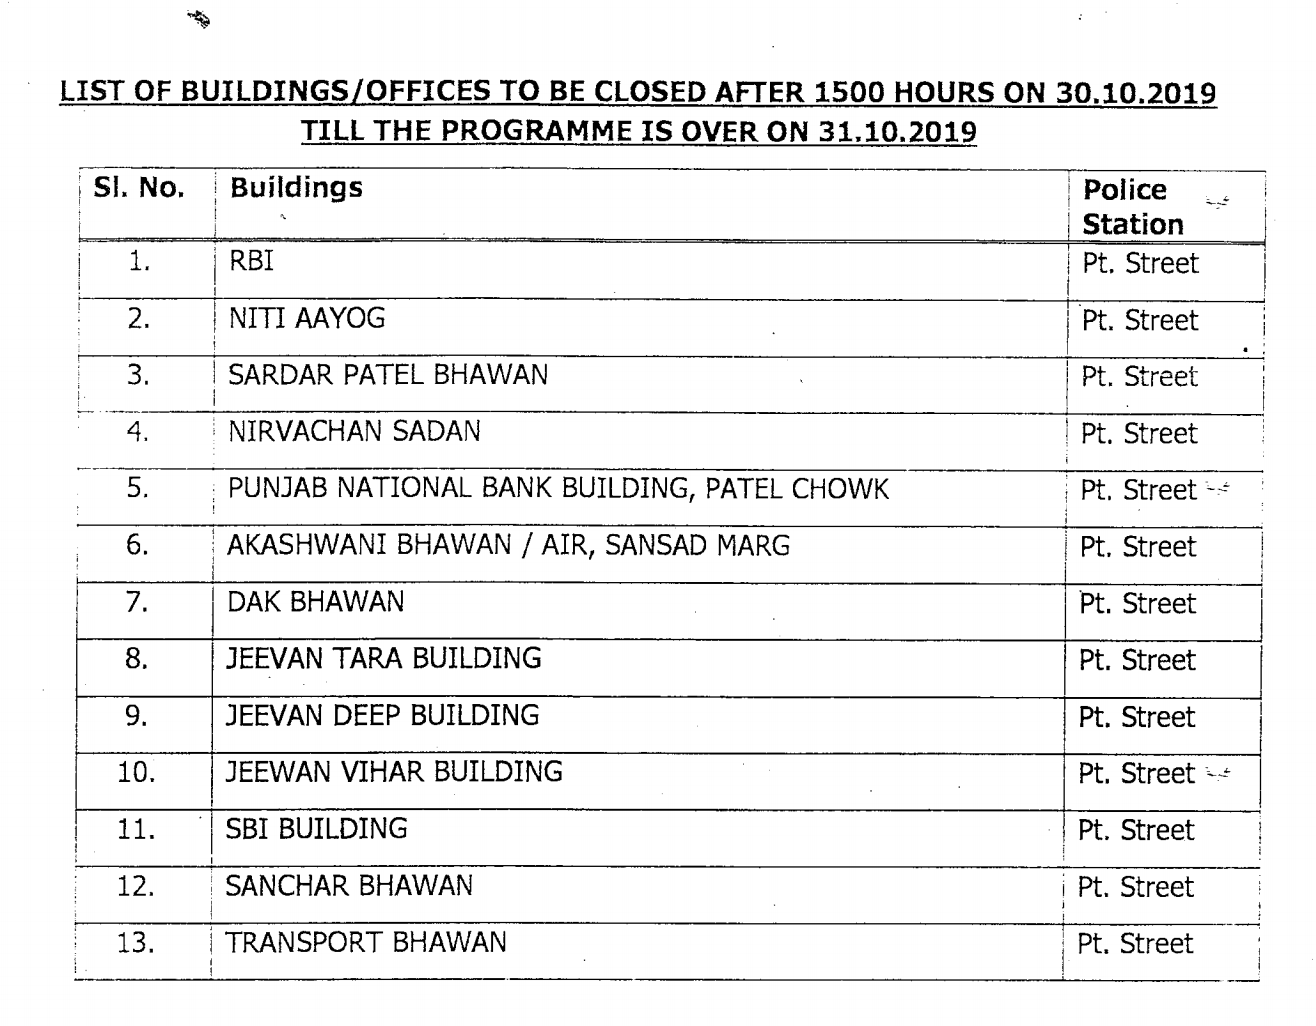 Closure of offices surrounding Patel Chowk on 30.10.2019 and 31.10.2019 - regarding.